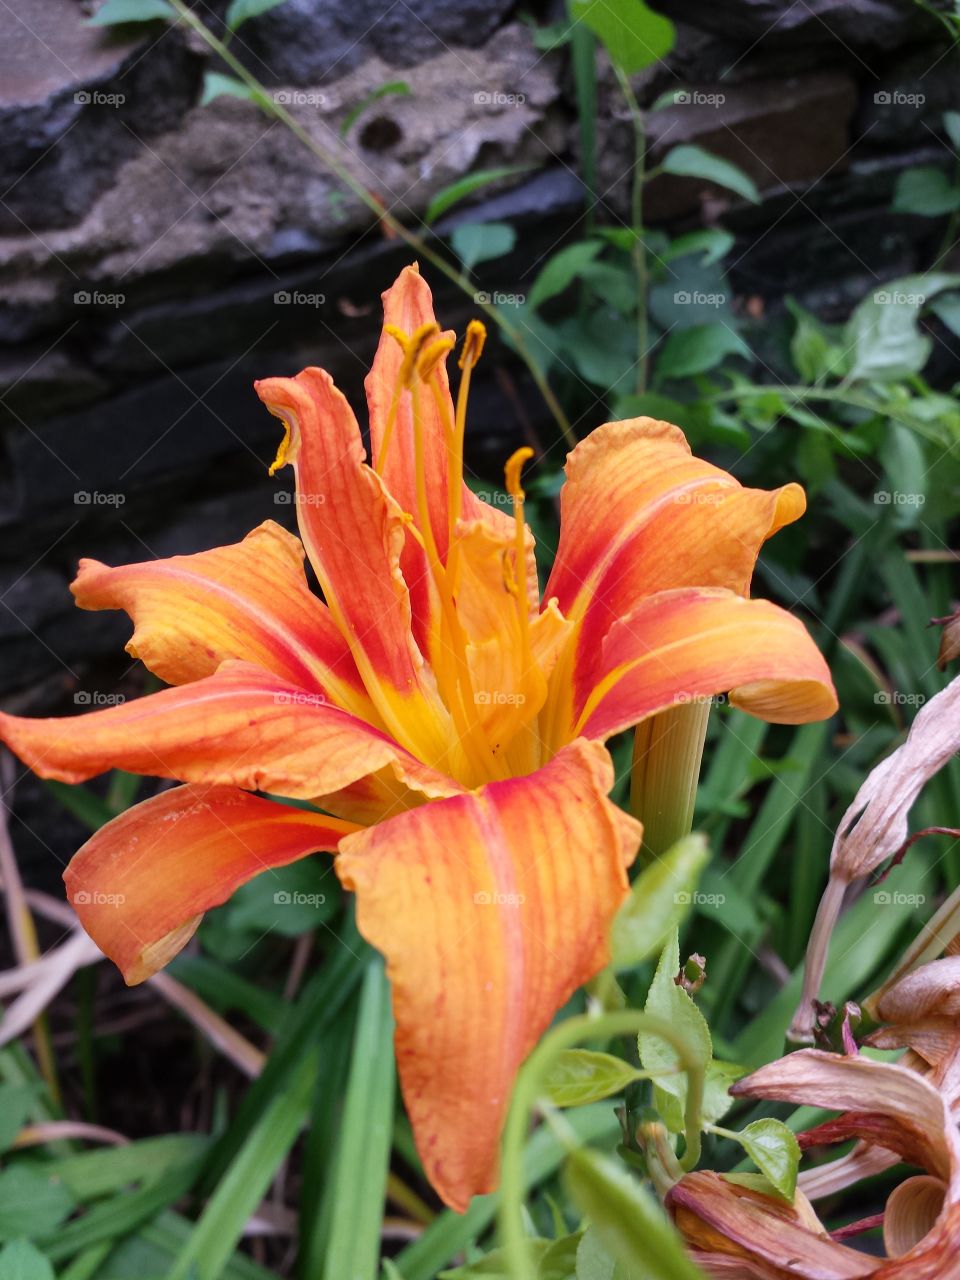 Orange lily flower blooming in plant